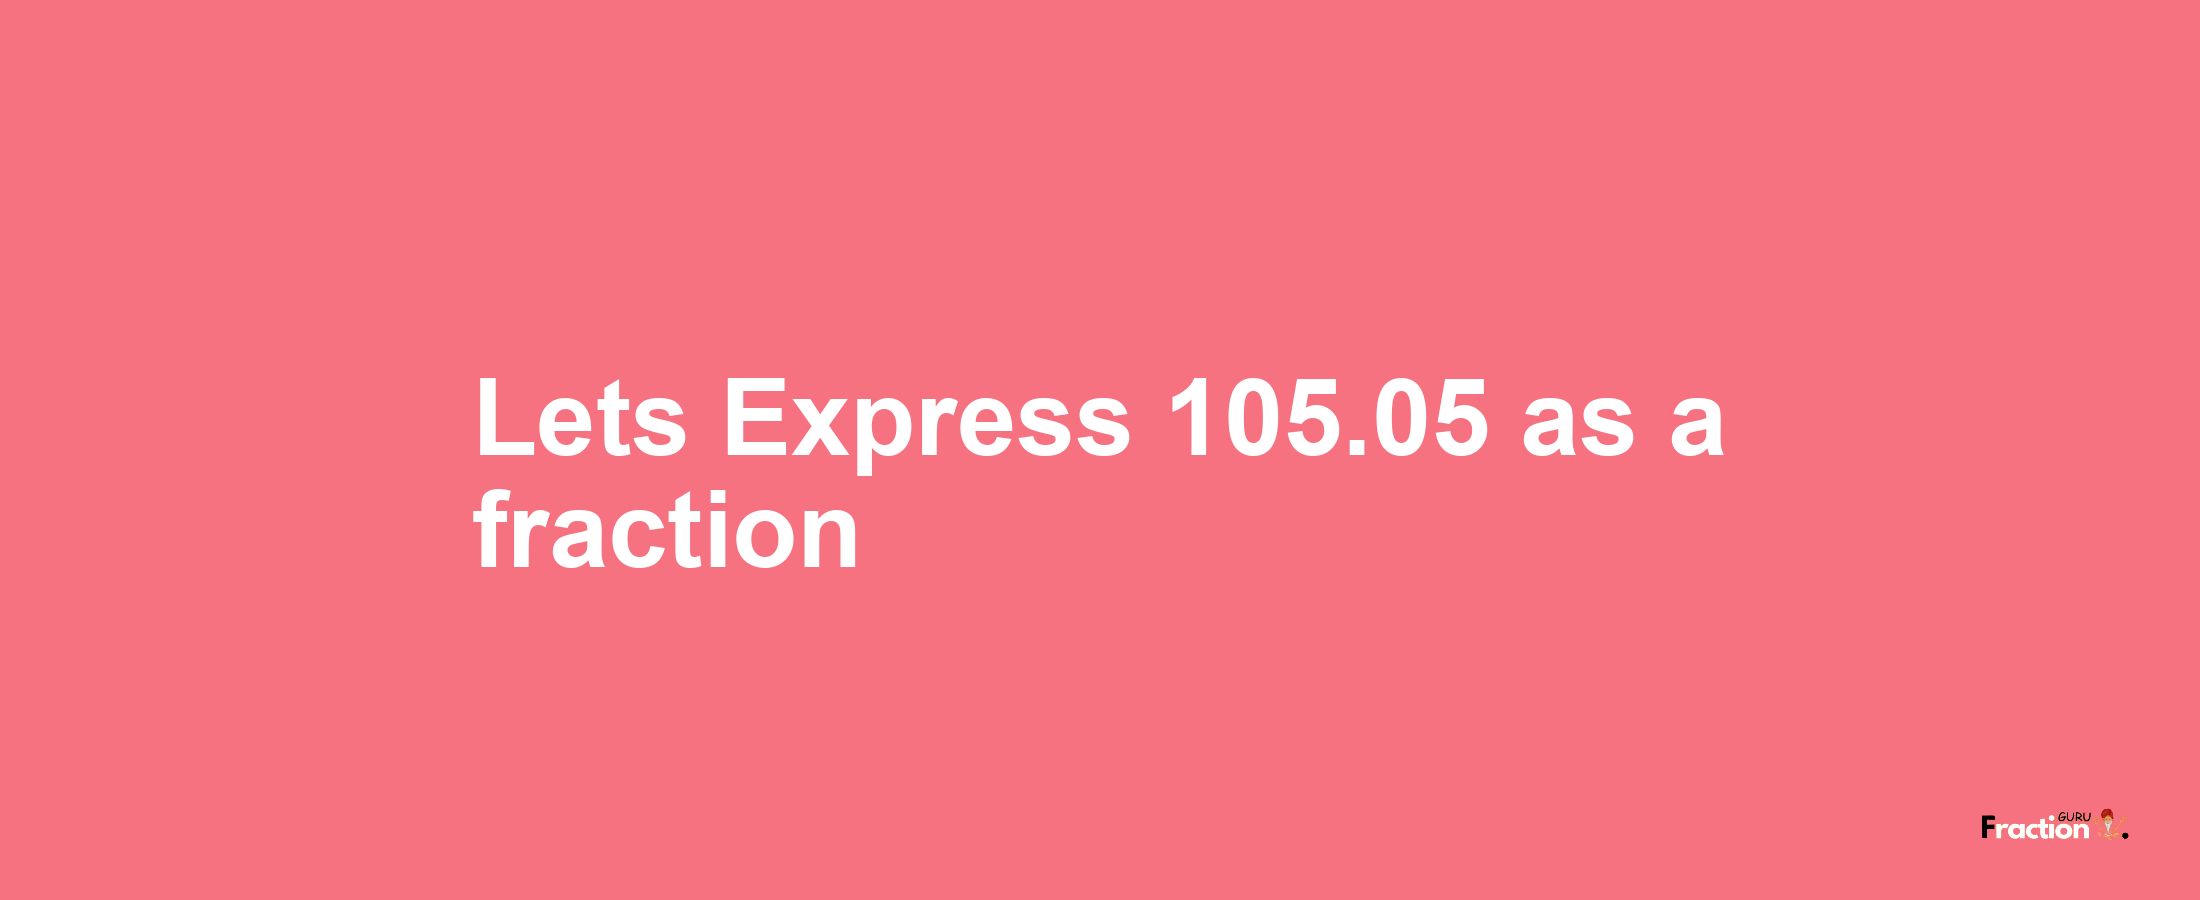 Lets Express 105.05 as afraction